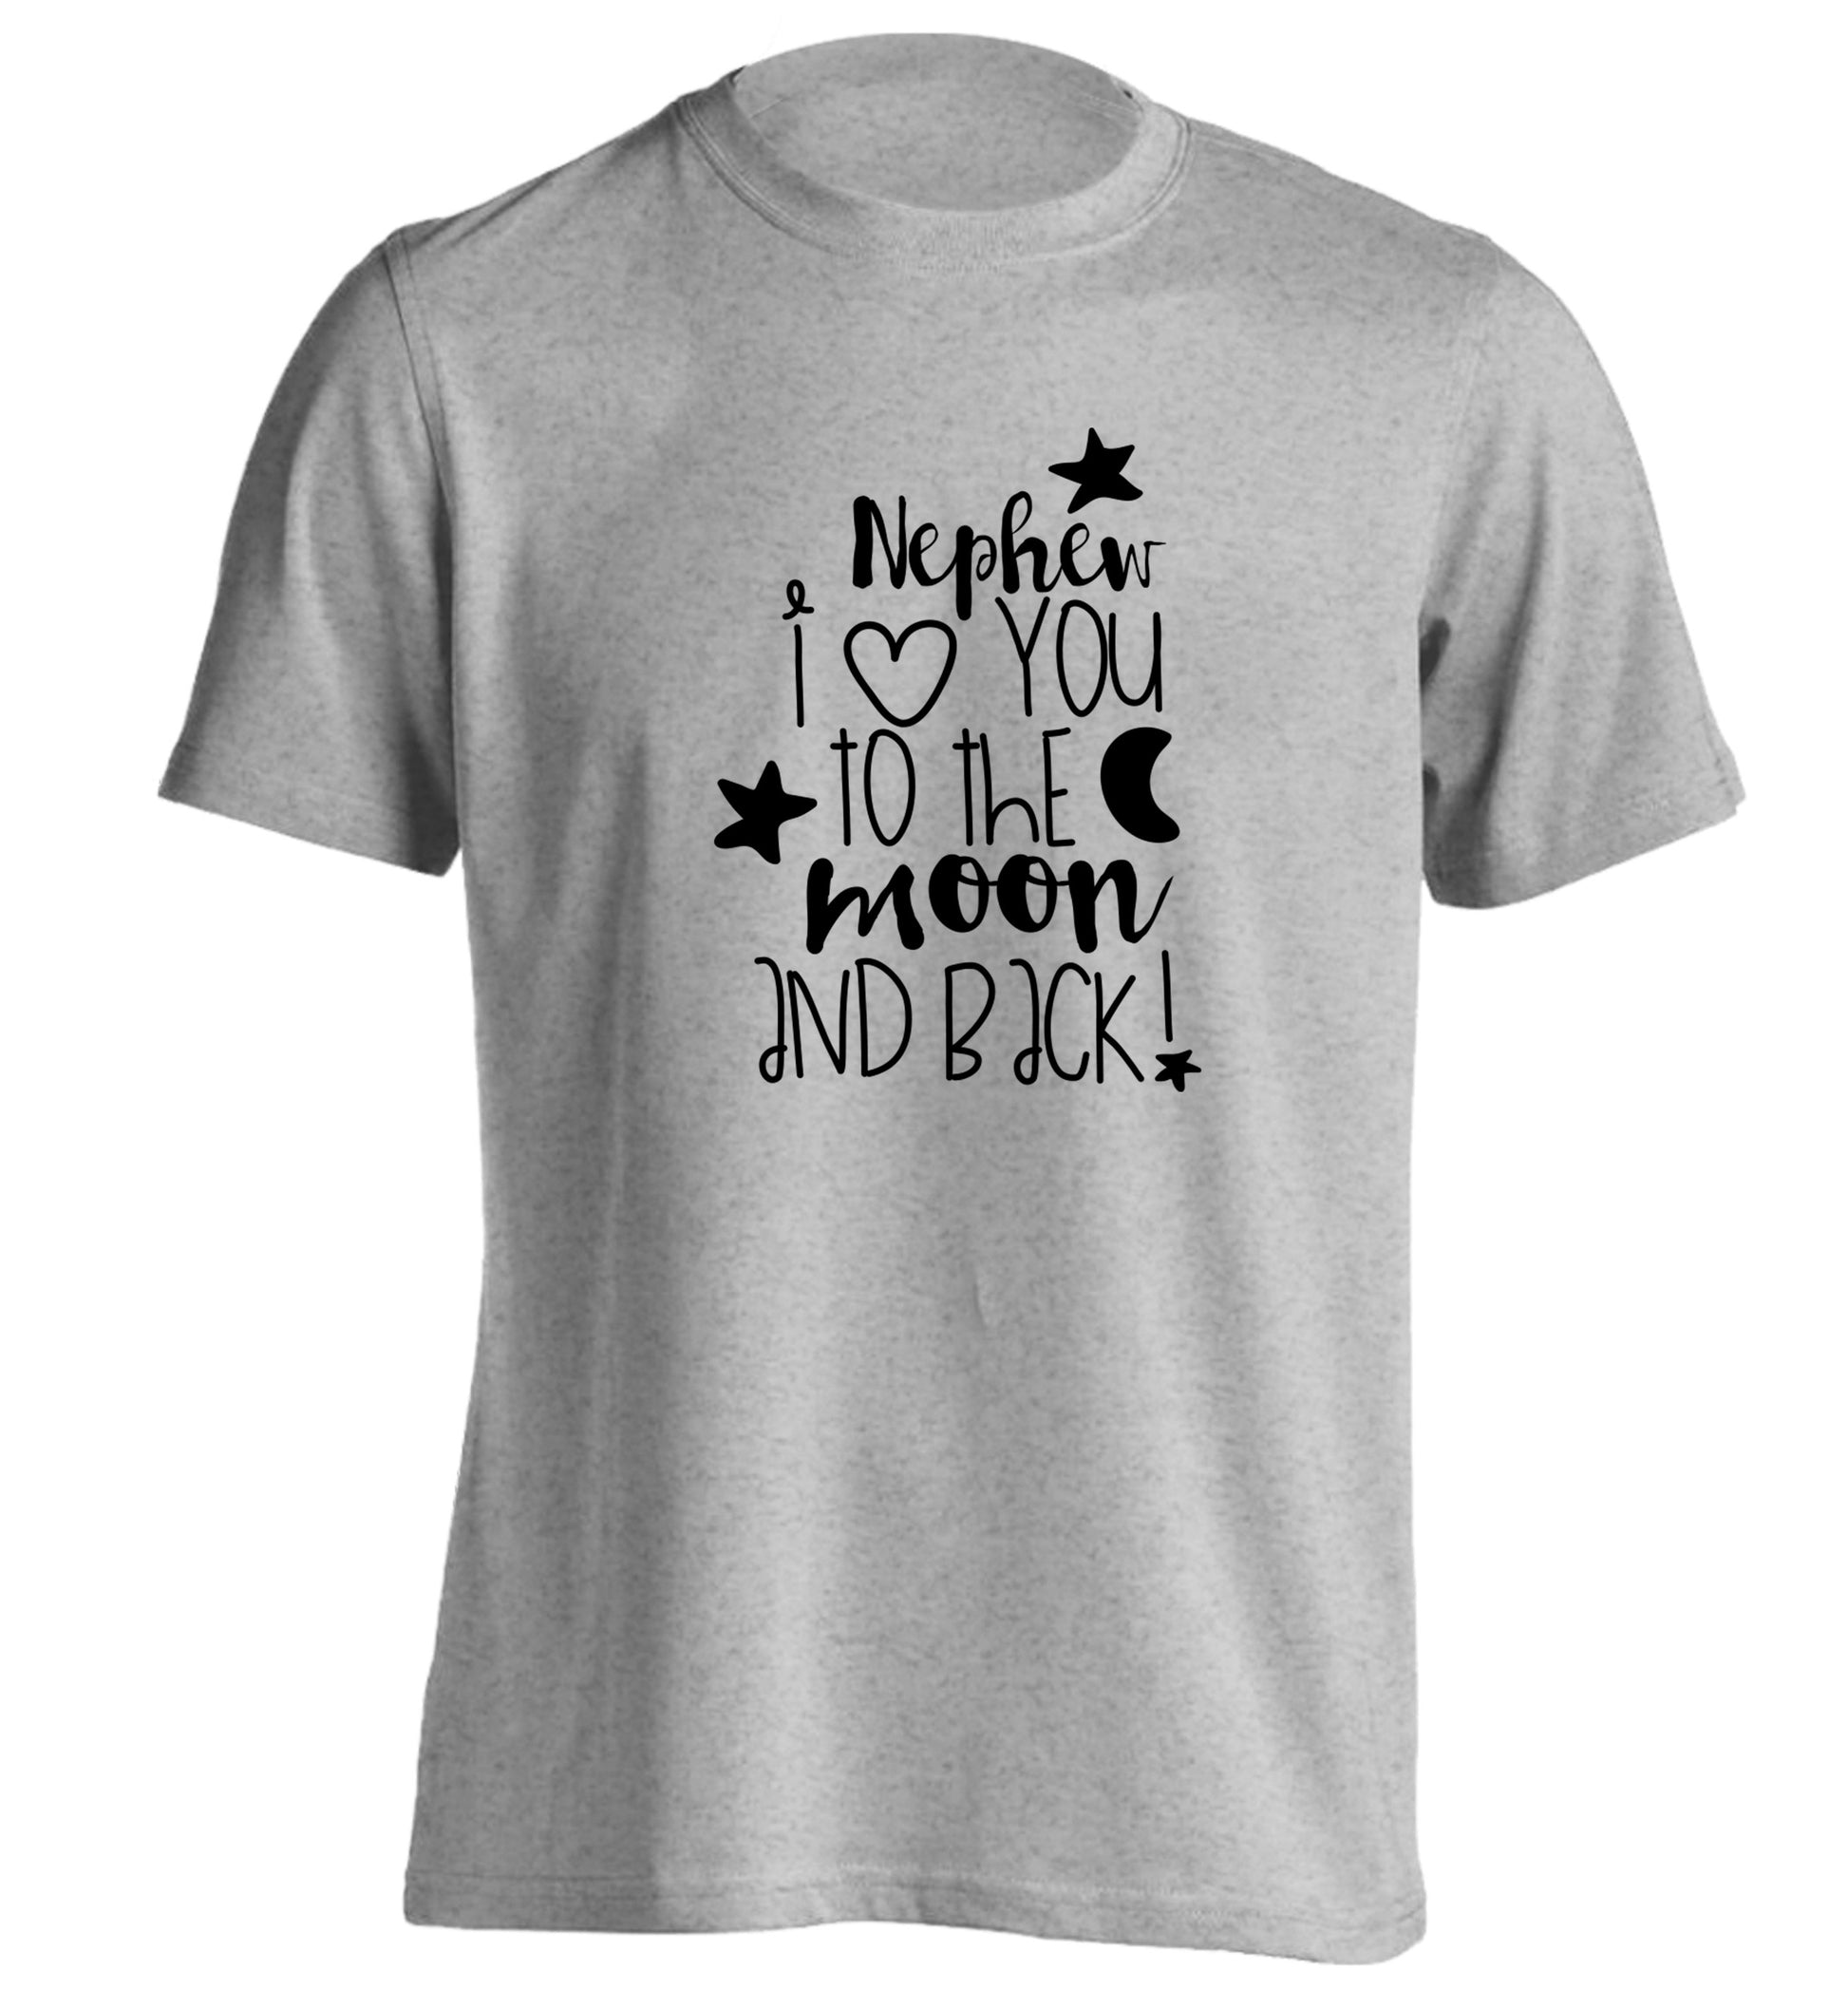 Nephew I love you to the moon and back adults unisex grey Tshirt 2XL